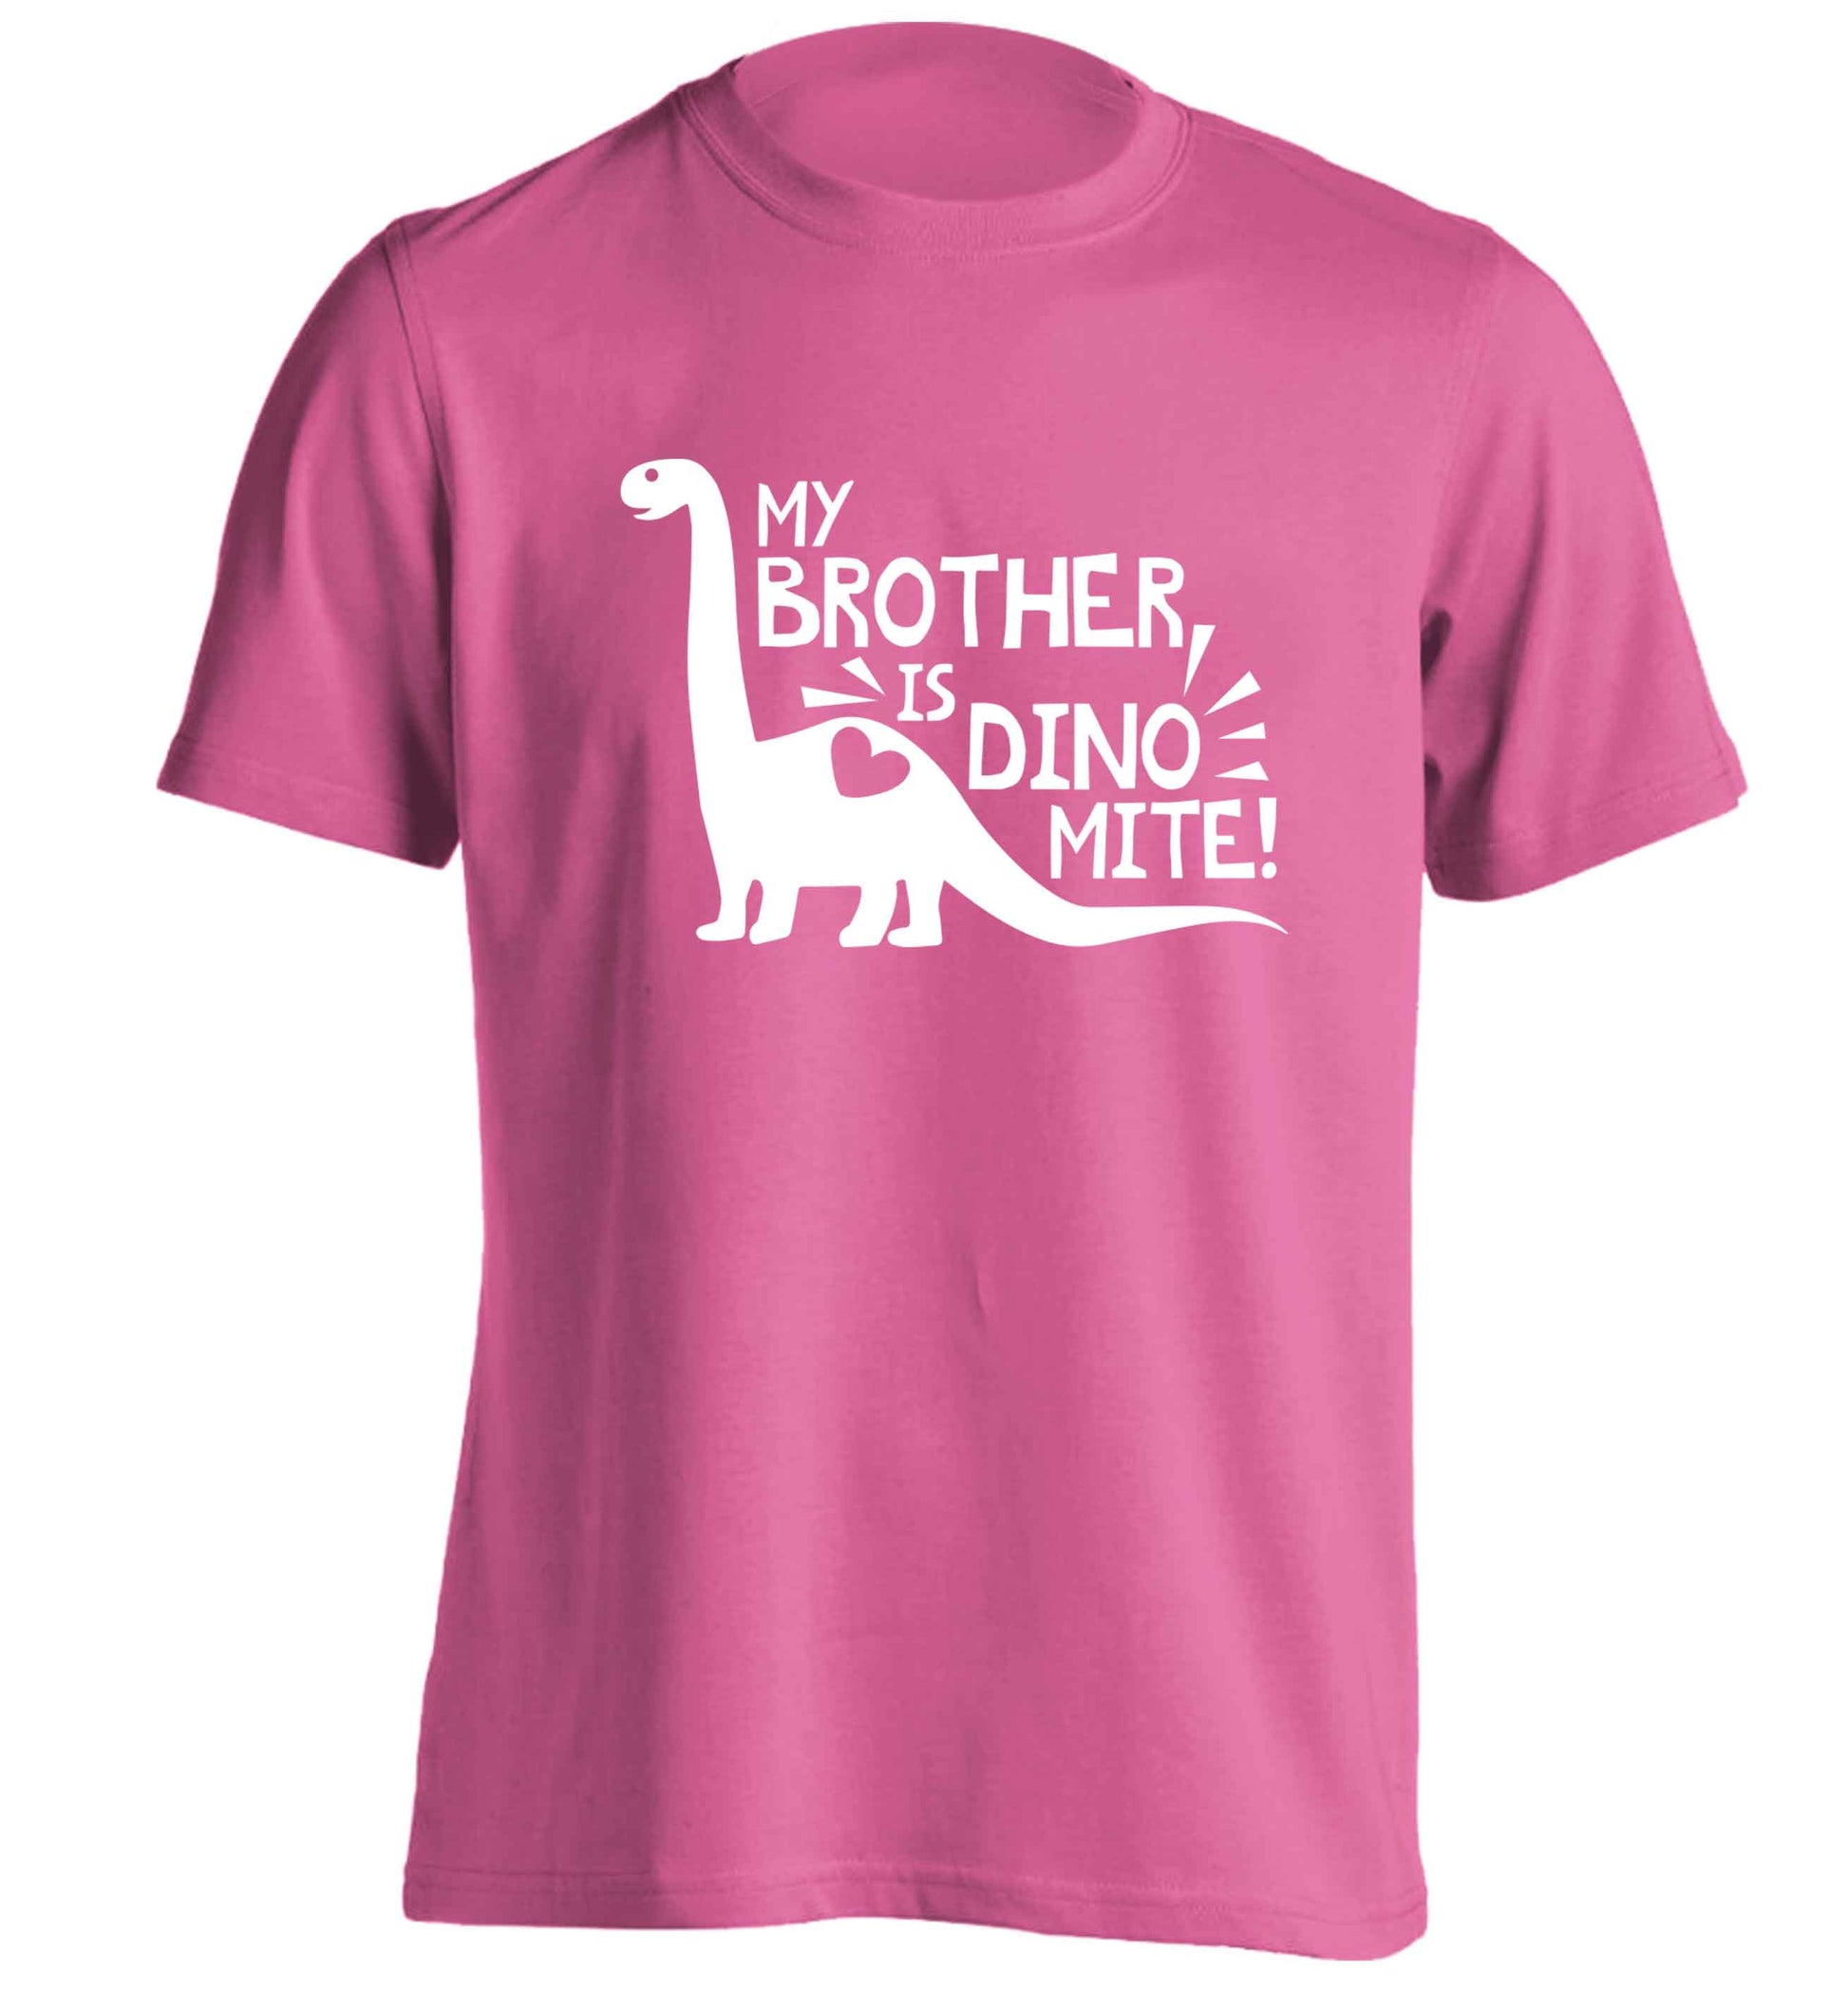 My brother is dinomite! adults unisex pink Tshirt 2XL